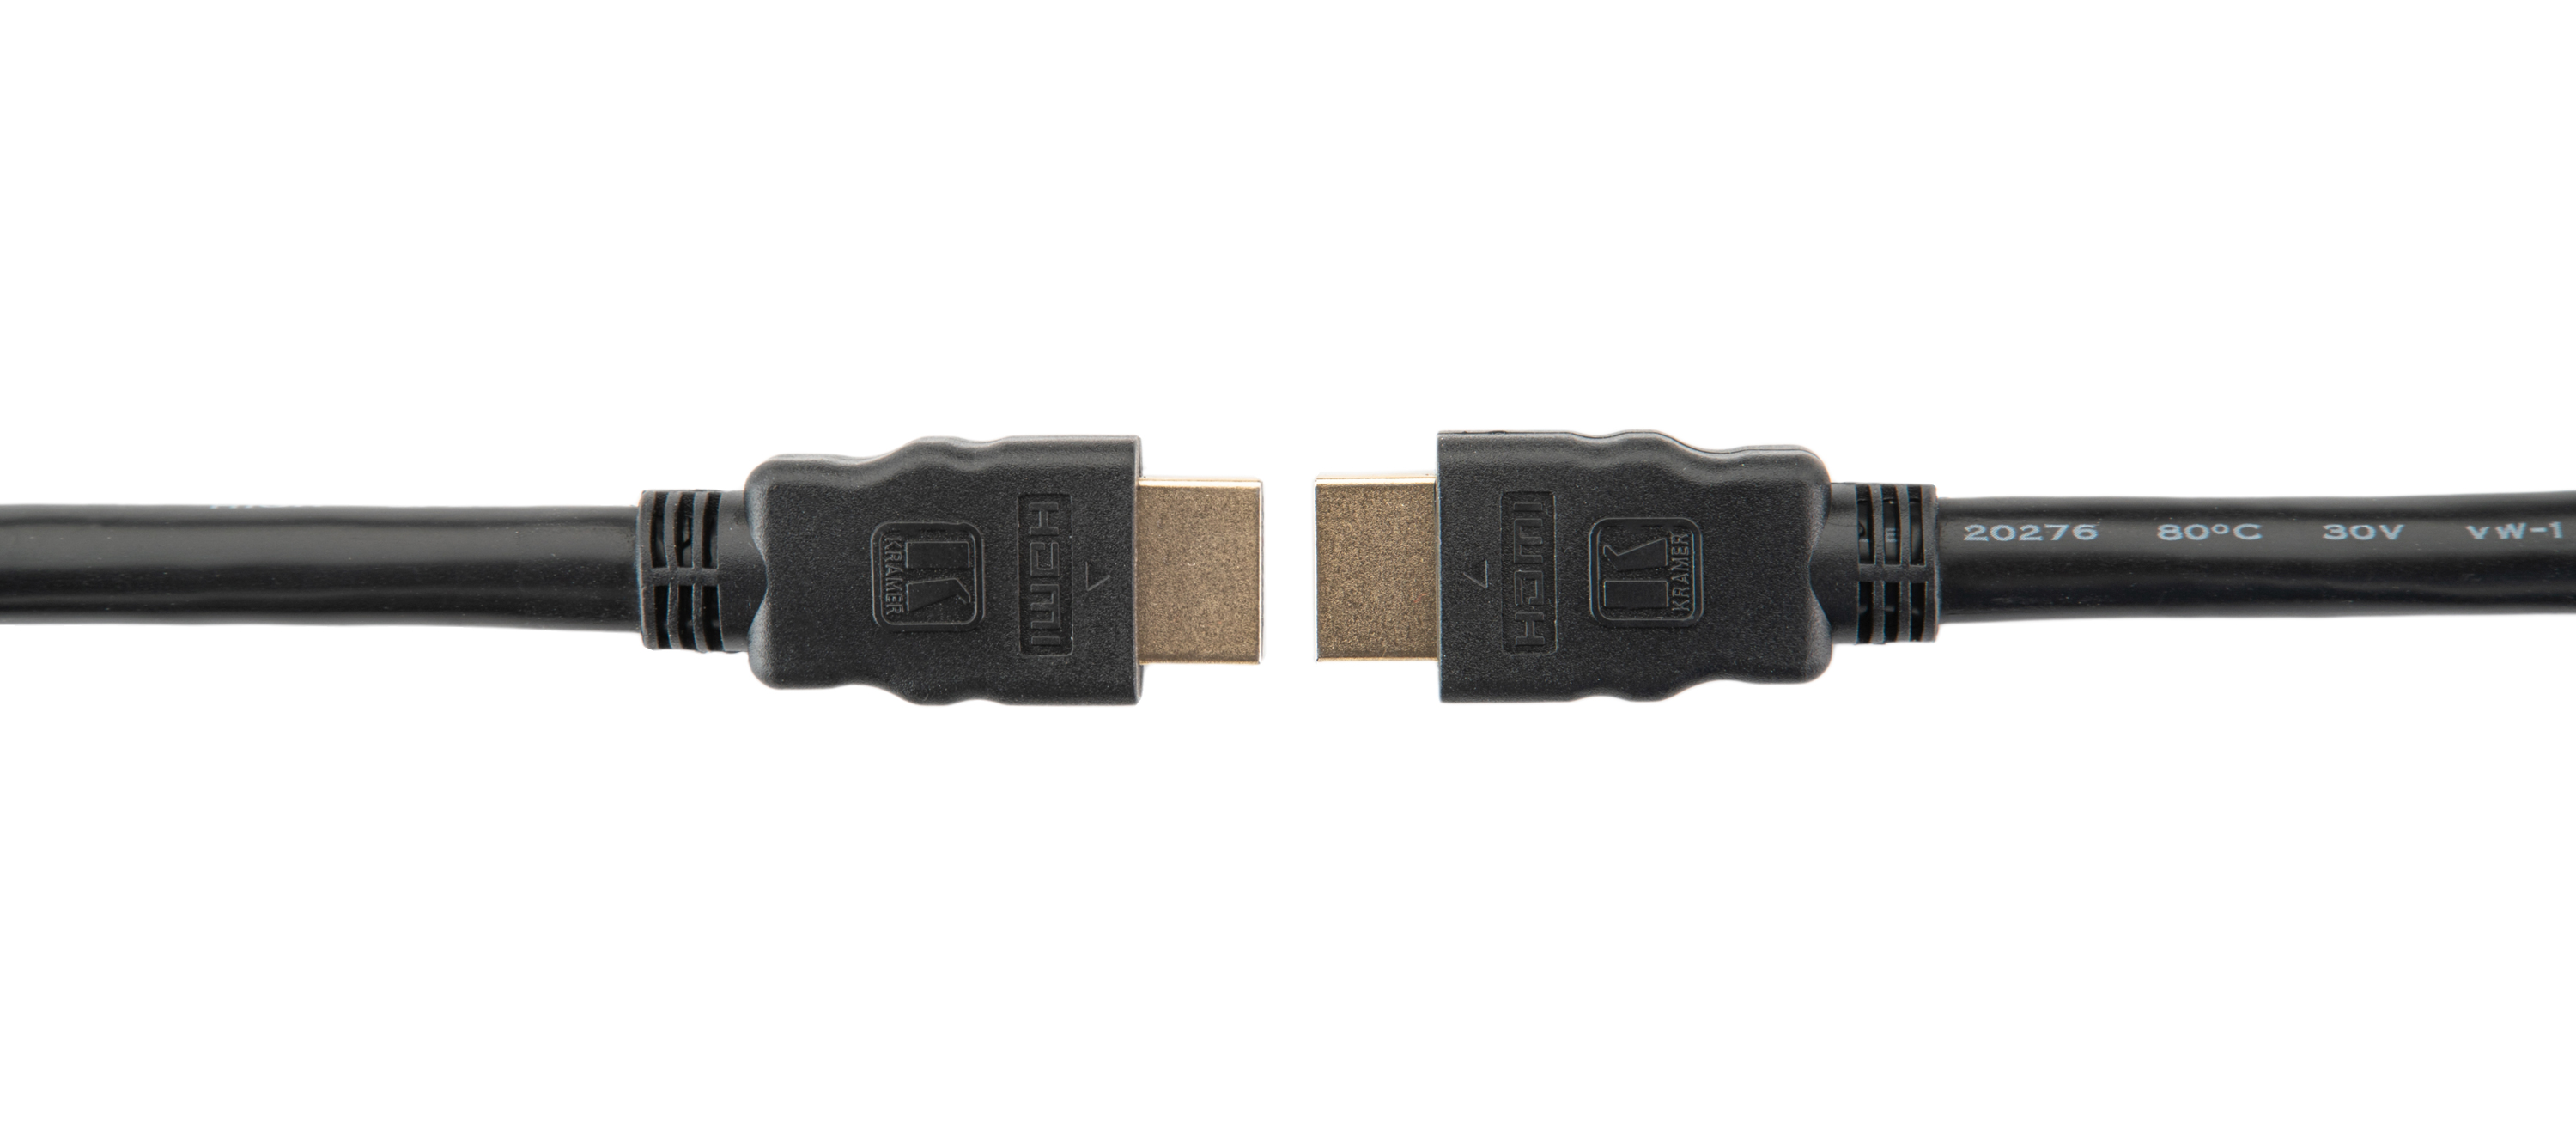 C-HM/ETH-10 High–Speed HDMI Cable with Ethernet - 10'